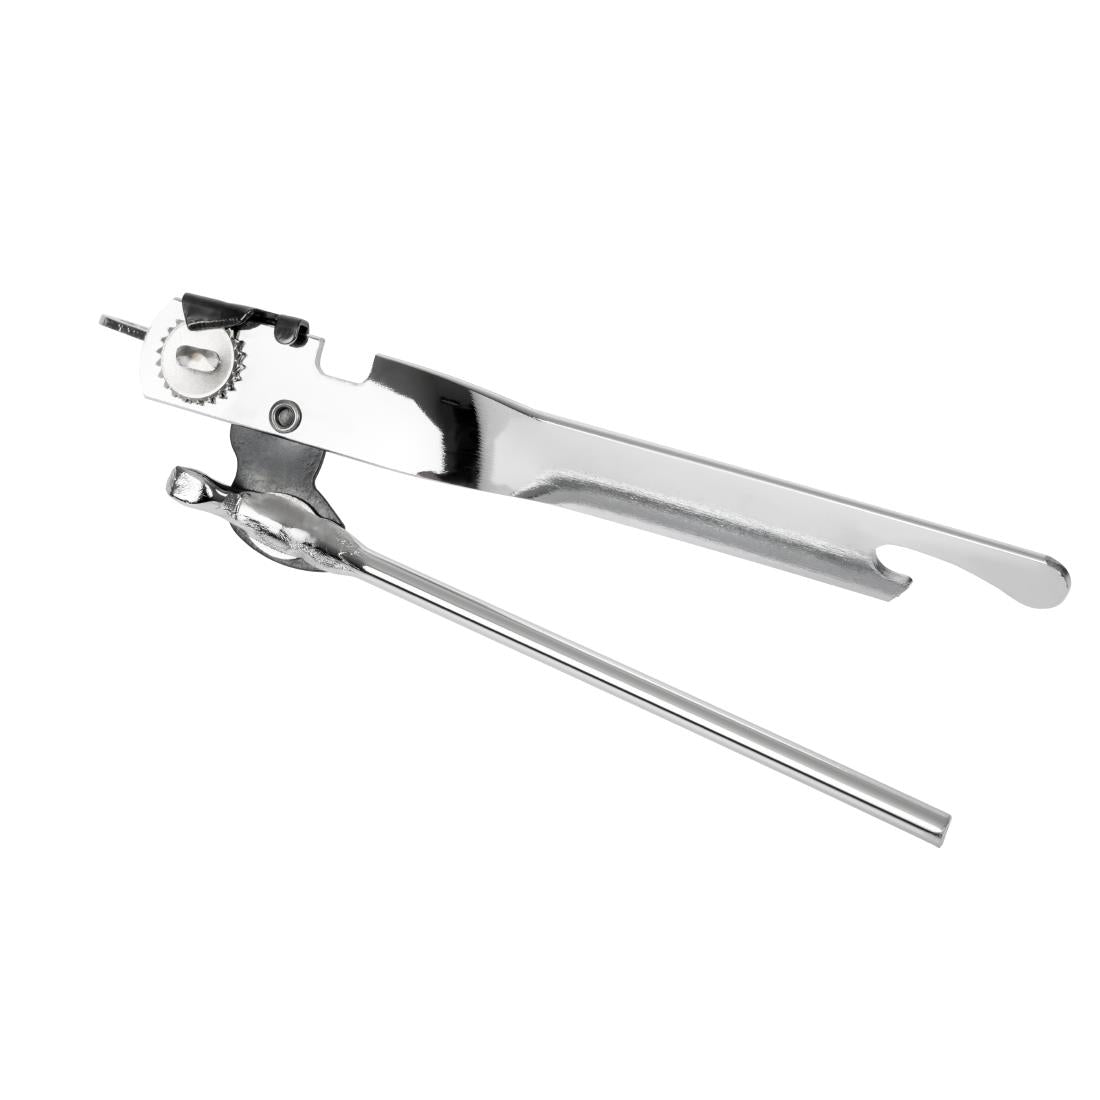 Kitchen Craft Butterfly Can Opener JD Catering Equipment Solutions Ltd